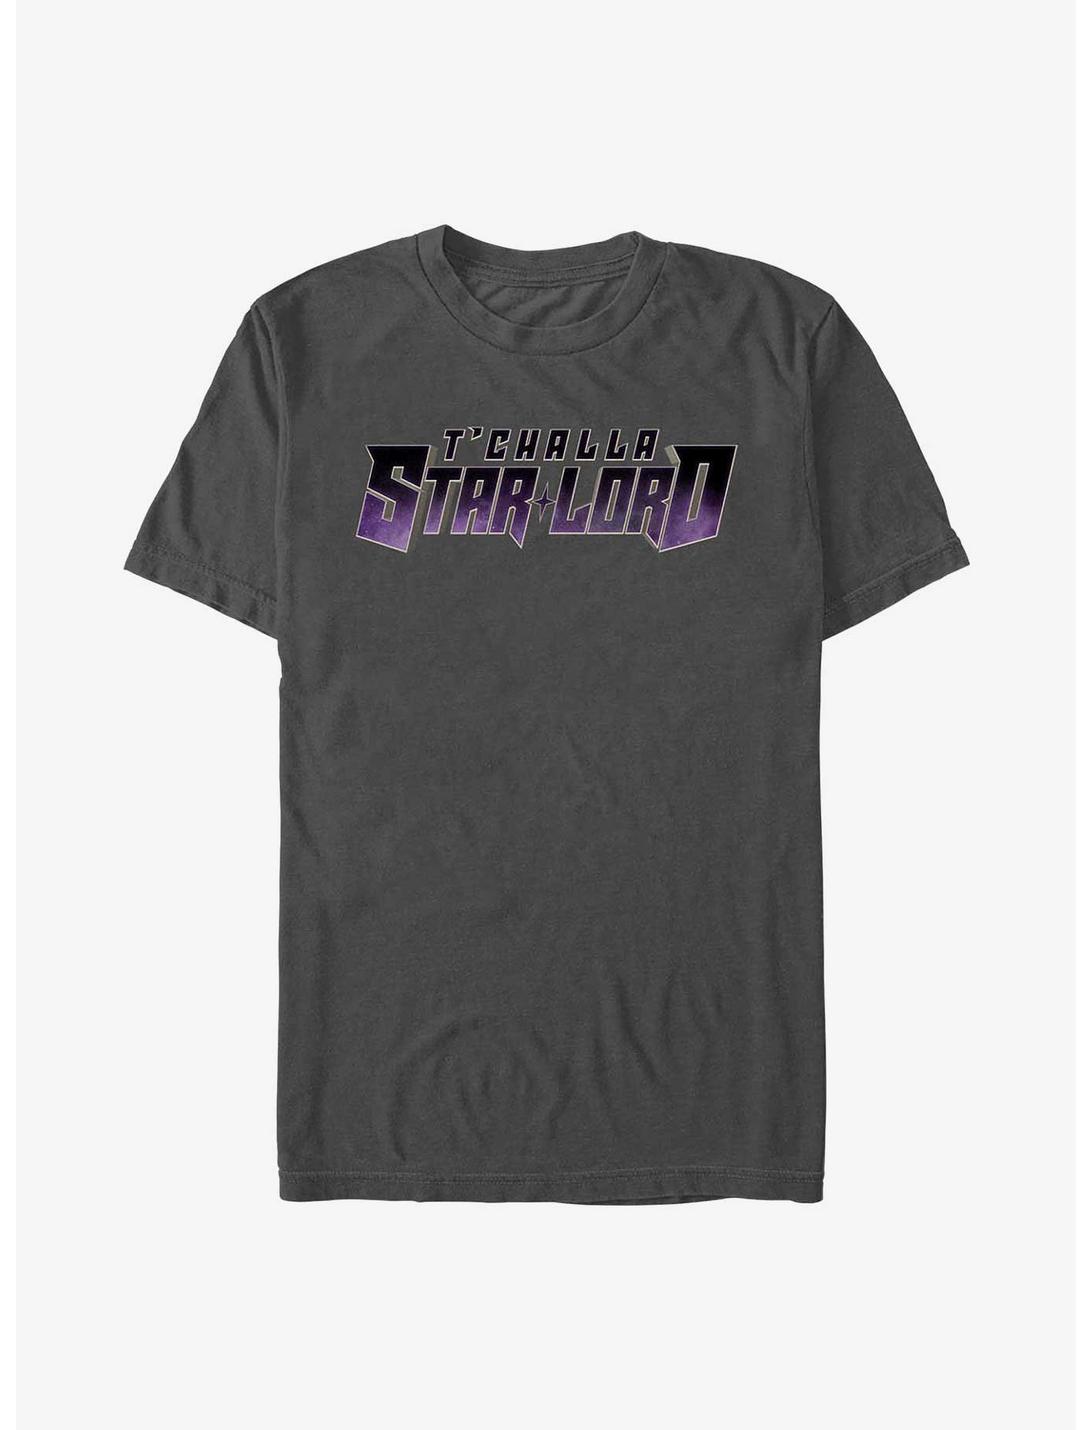 Marvel What If...? T'Challa Star-Lord T-Shirt, CHARCOAL, hi-res